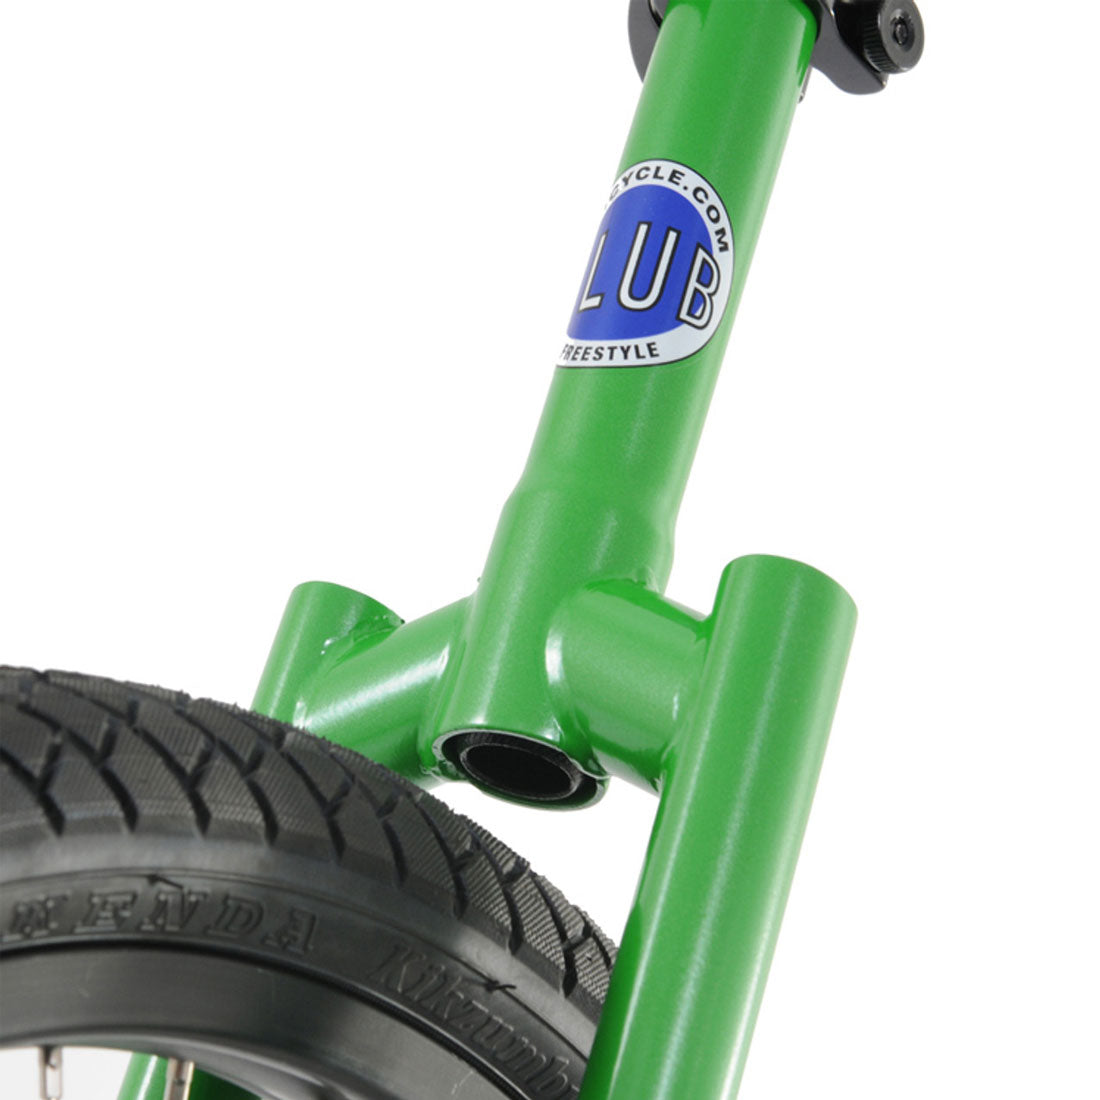 Club Freestyle 20inch Unicycle - Green/Black Other Fun Toys